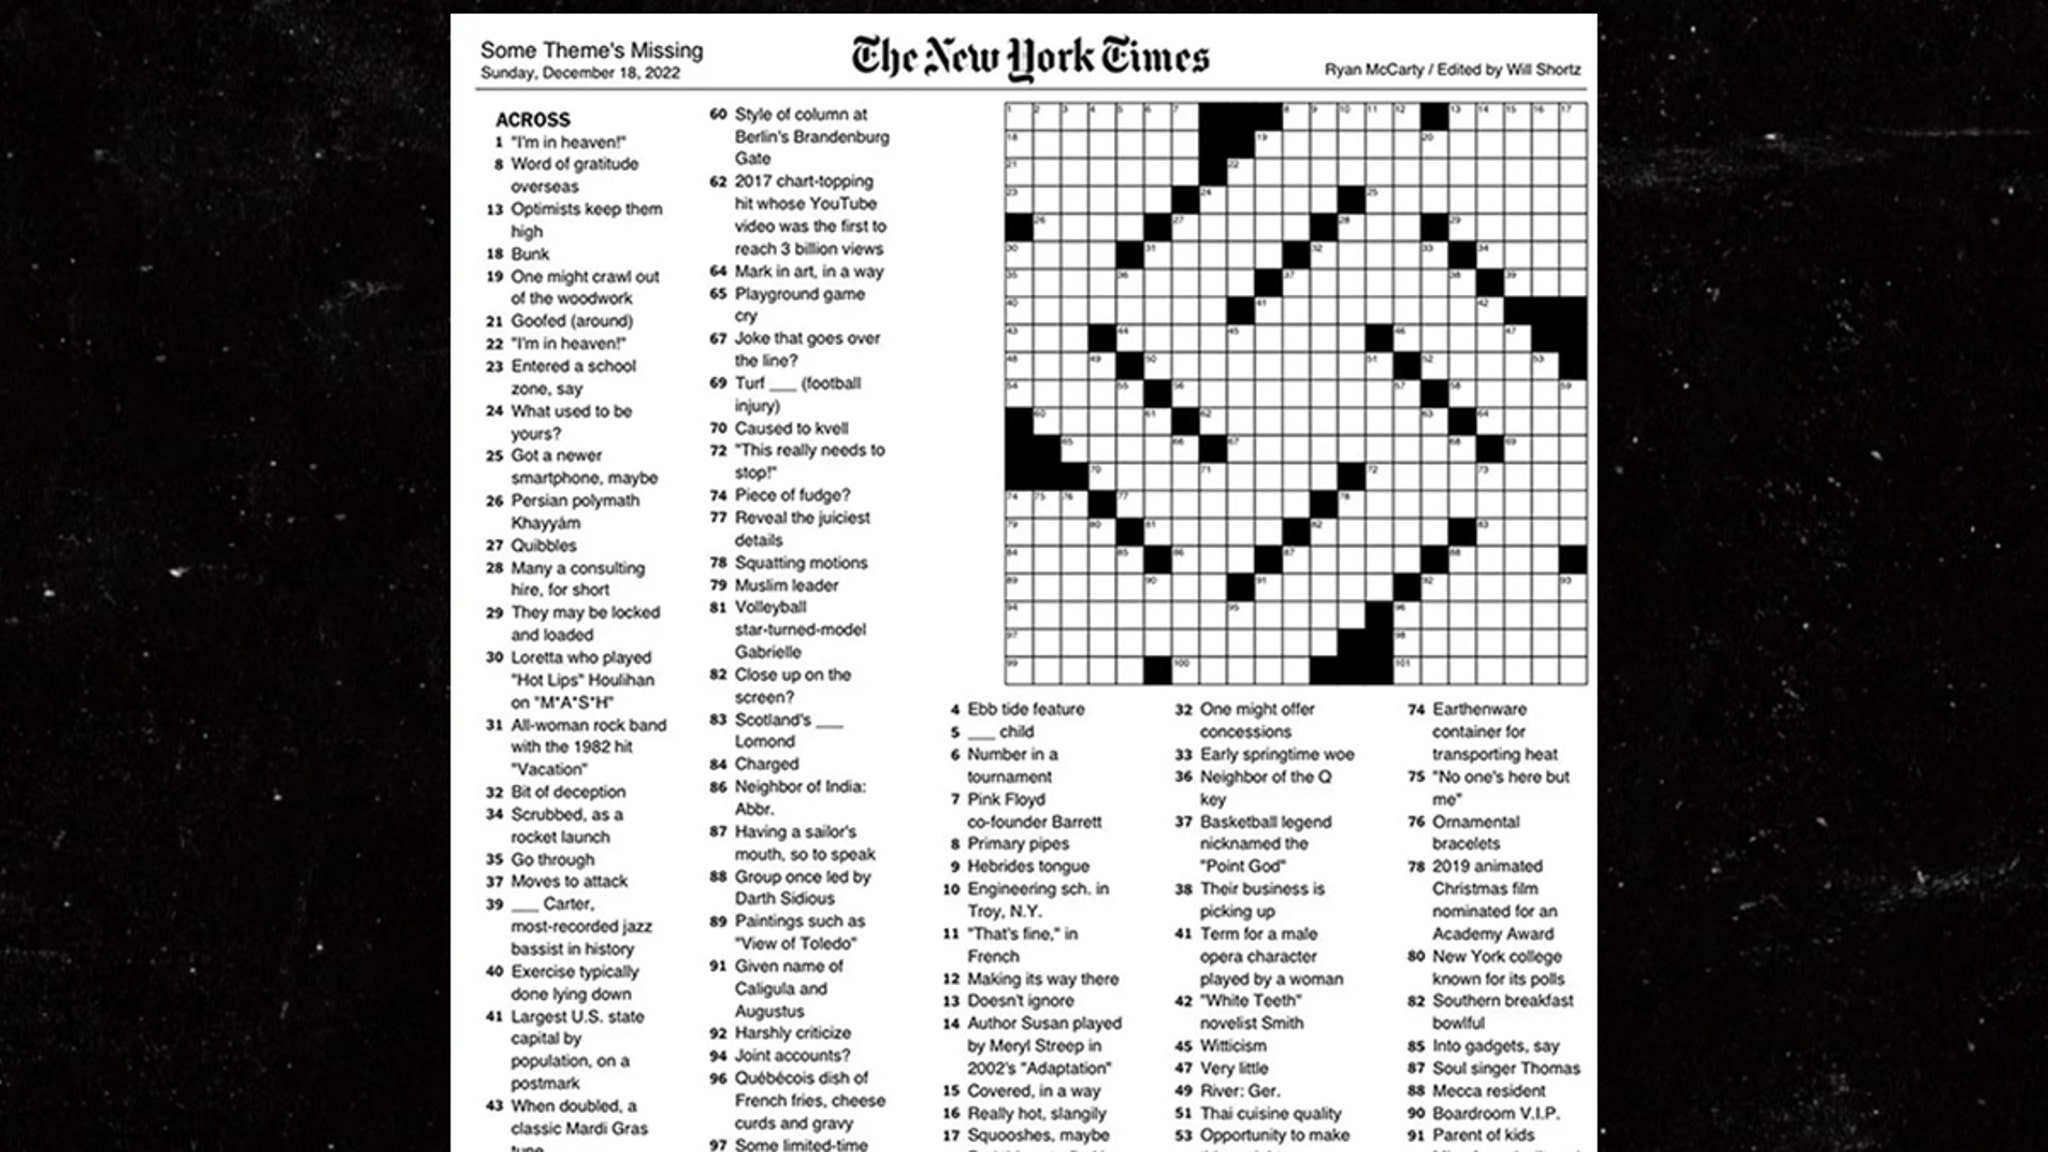 New York Times Dragged After Crossword #39 s Swastika Shape During Hanukkah